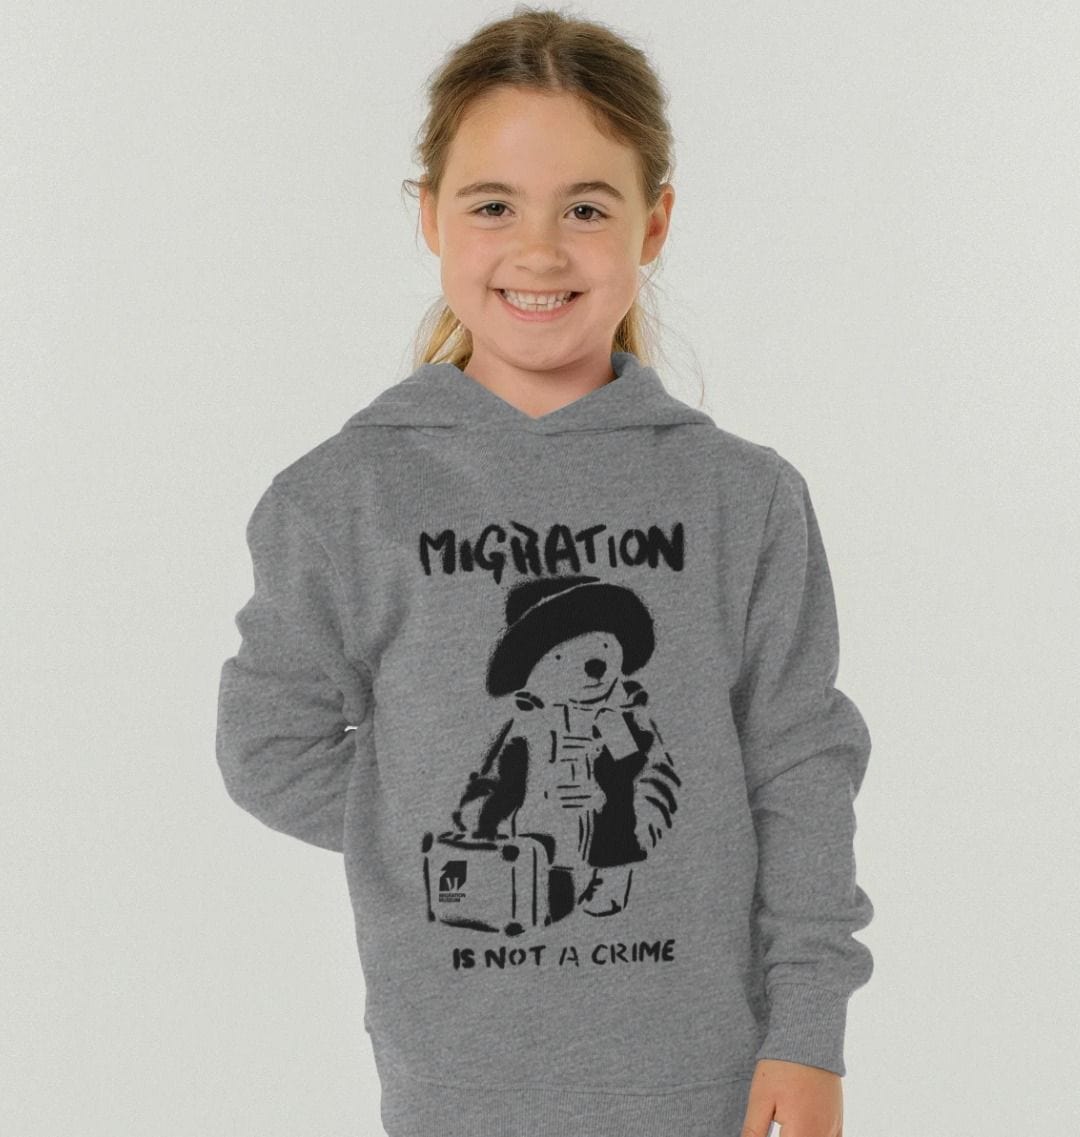 Migration Is Not A Crime - Children's Hoodie